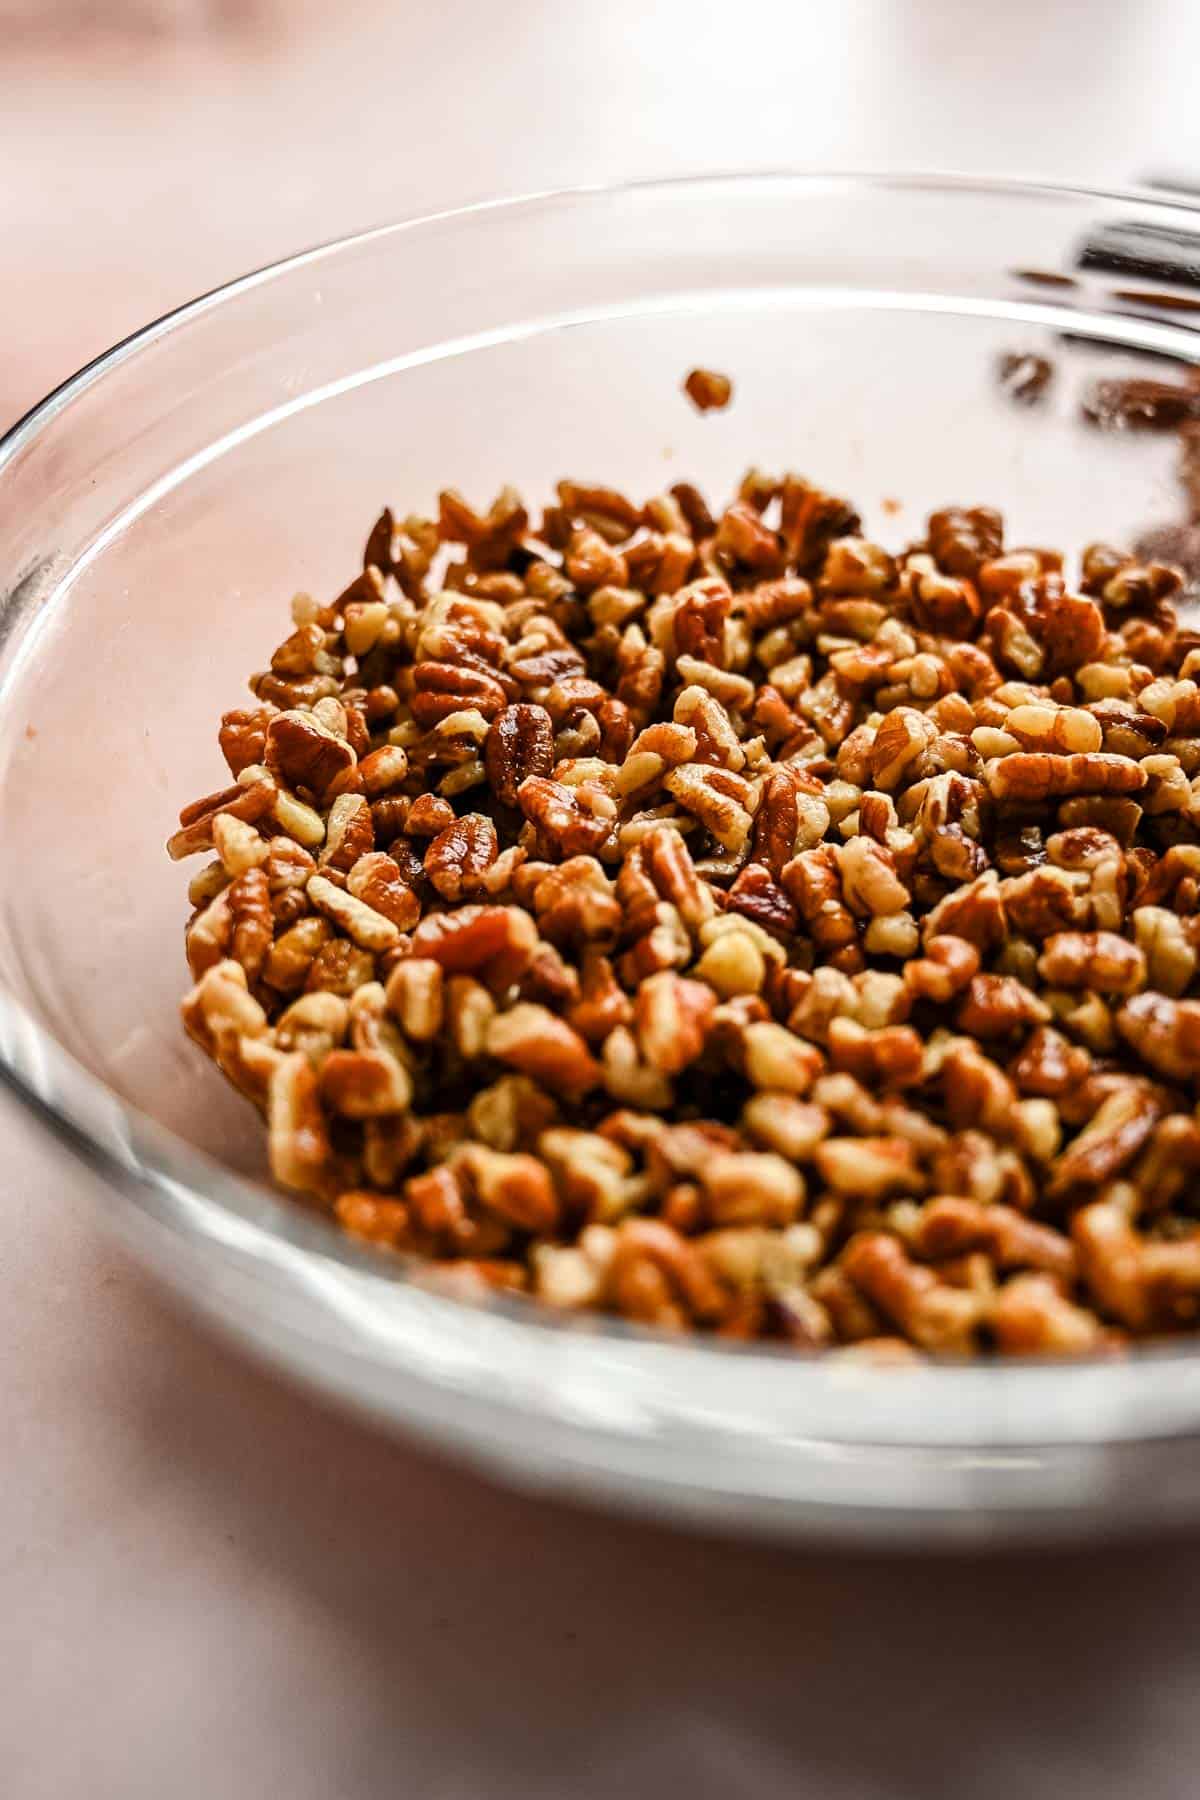 The pecans and bourbon sitting in a small bowl.